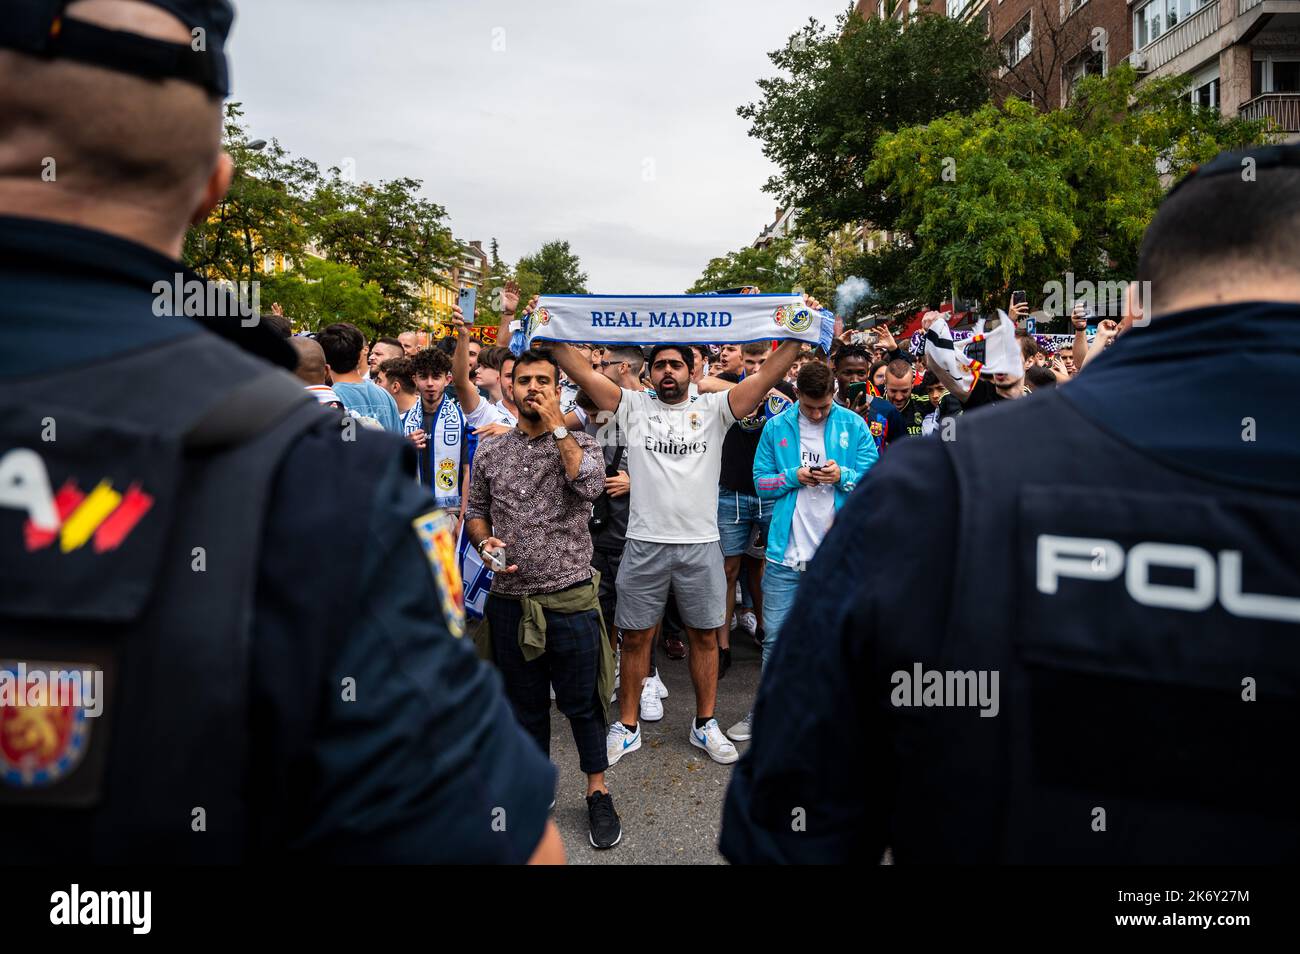 Madrid, Spain. 16th Oct, 2022. Real Madrid fans shout slogans ahead of the derby match 'El Clasico' in the Santiago Bernabeu Stadium between Real Madrid and F.C. Barcelona teams. Credit: Marcos del Mazo/Alamy Live News Stock Photo